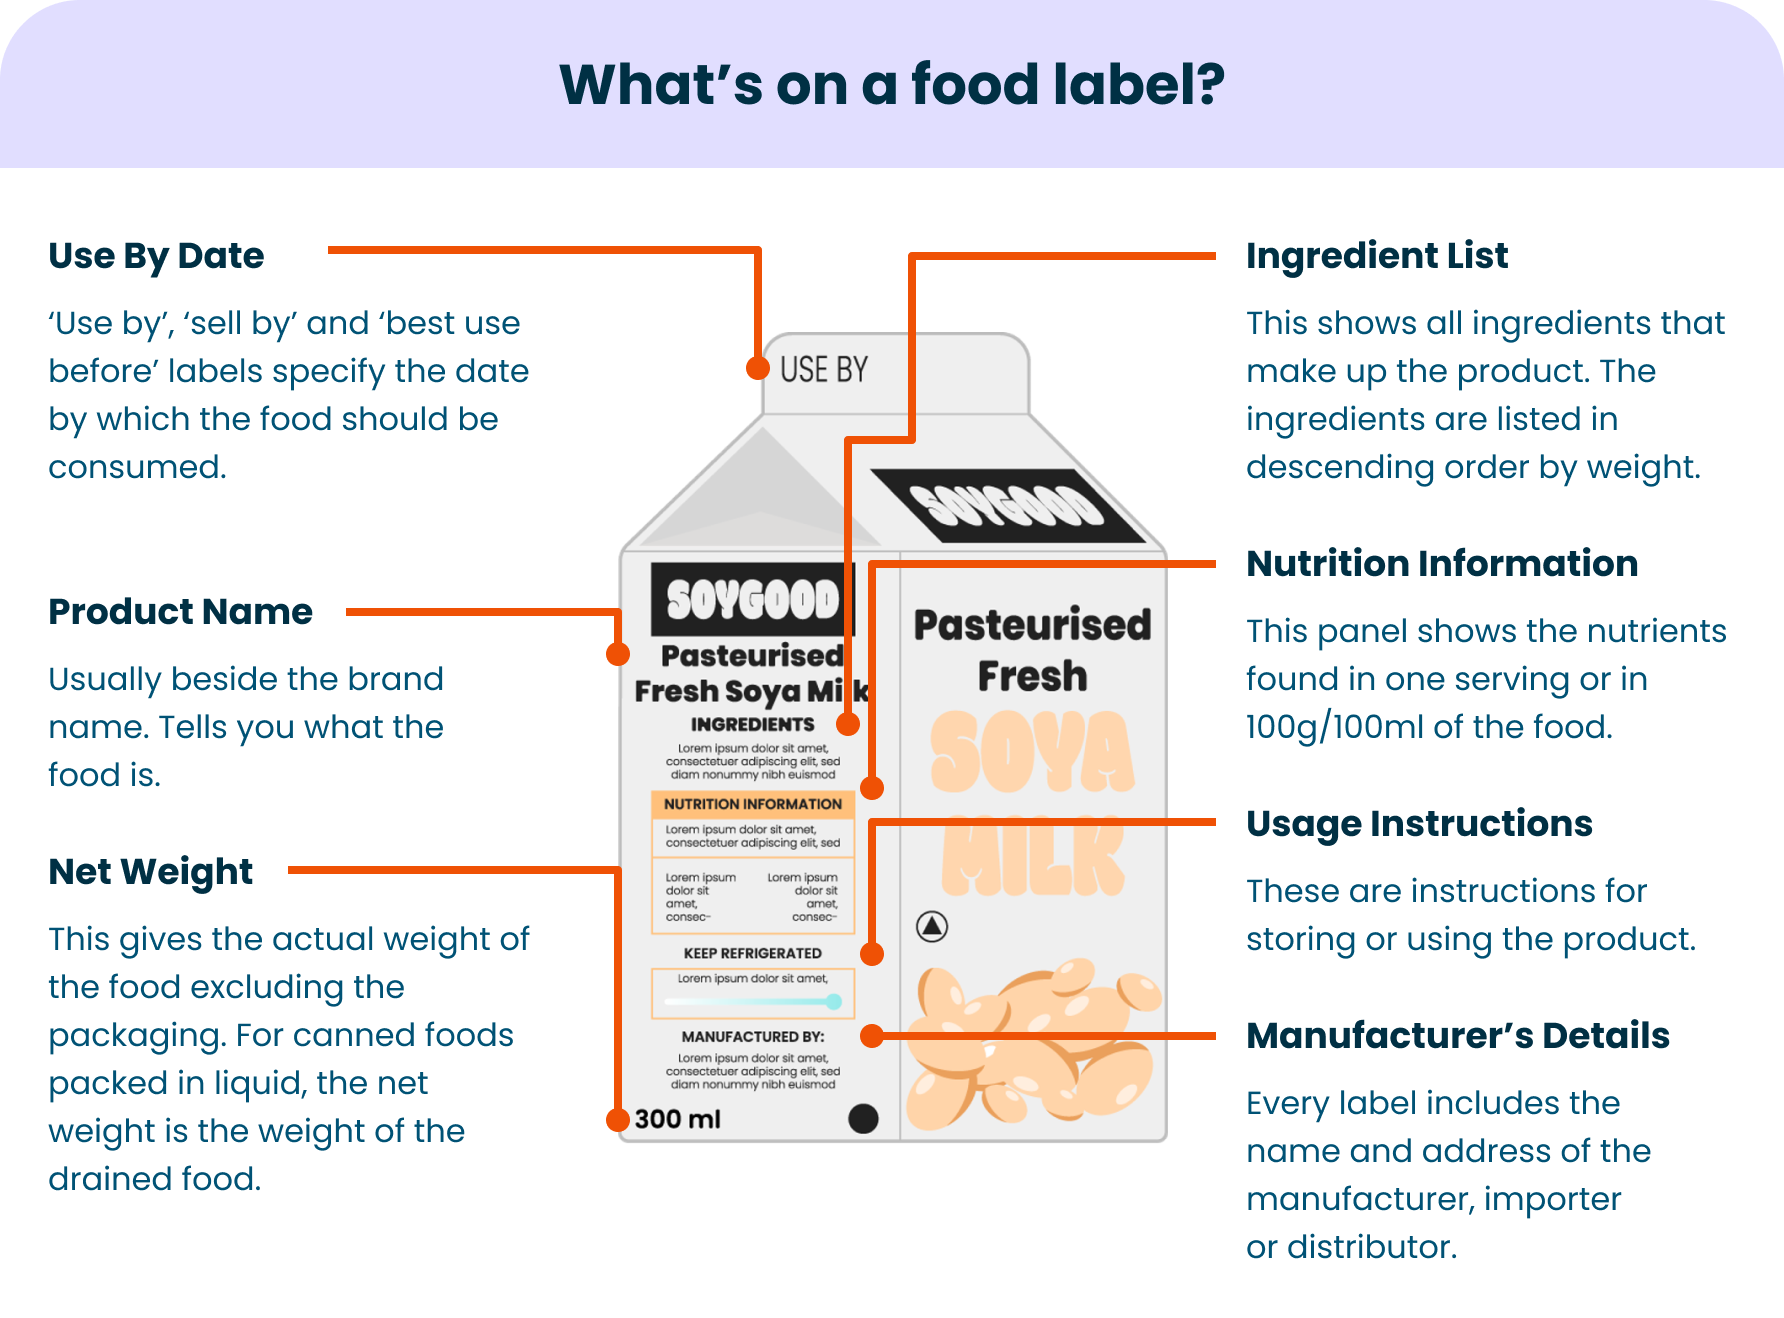 What’s on a food label?